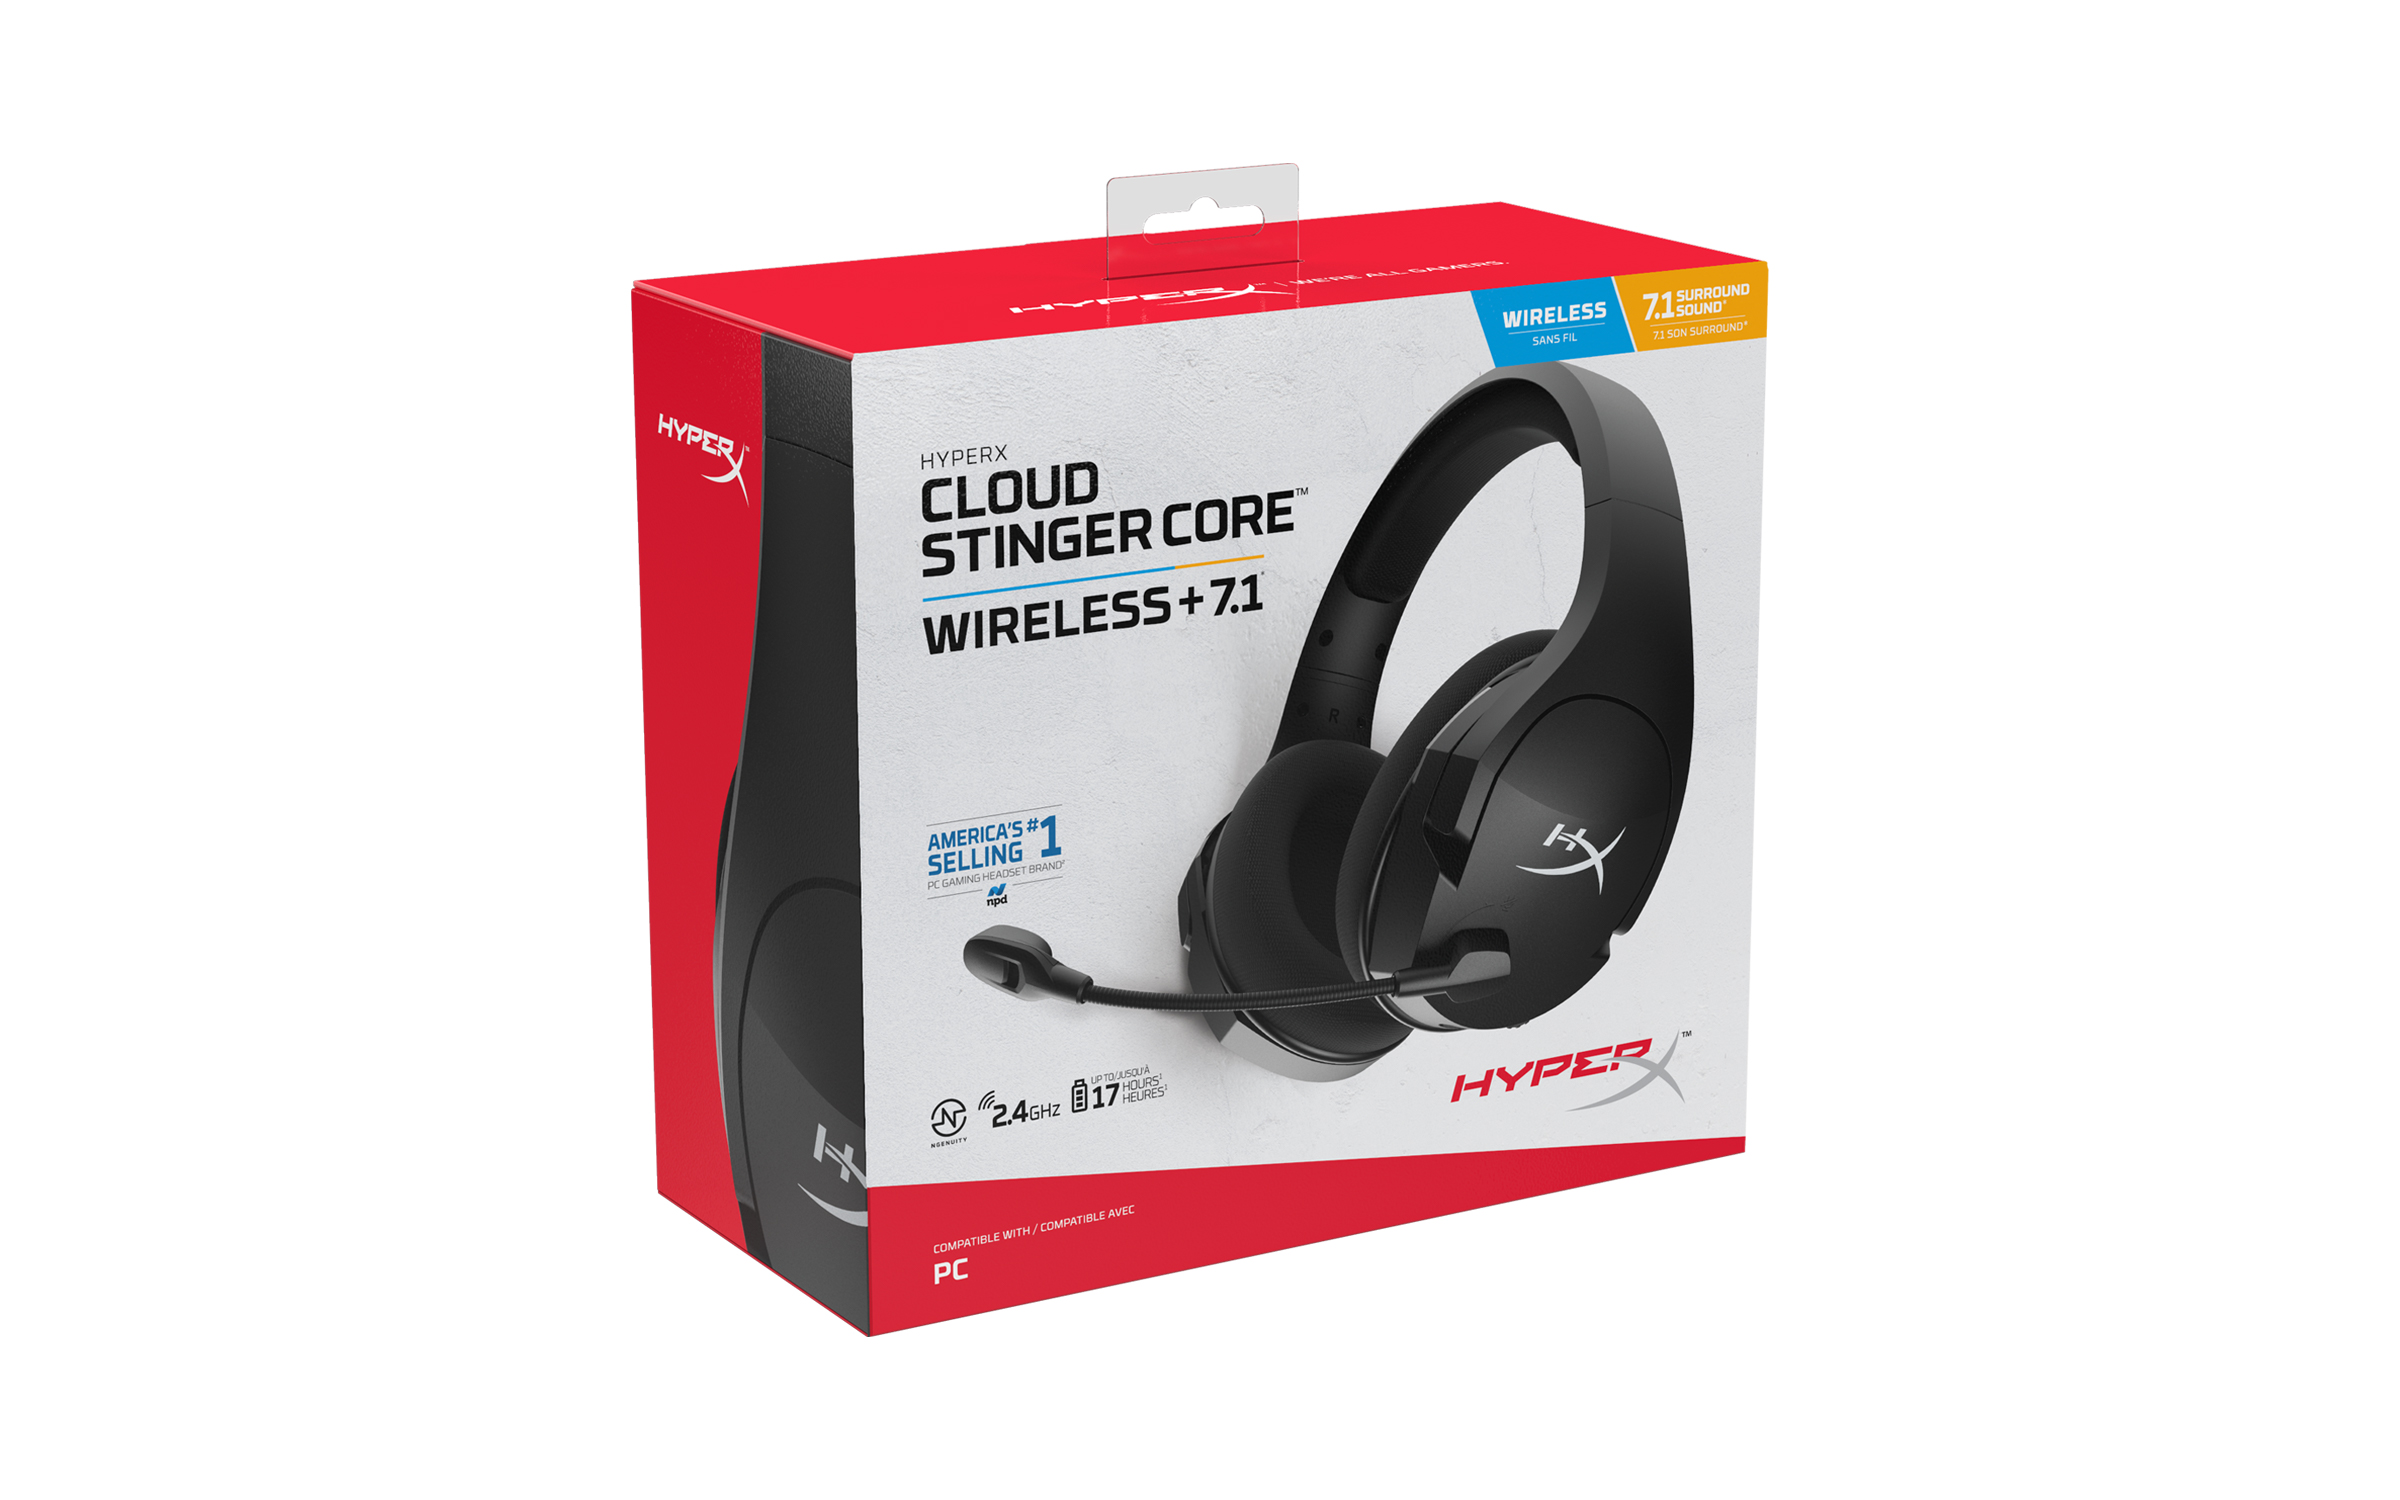 HyperX Cloud Stinger Core Wireless 7.1 Gaming Headset for PC - image 3 of 3